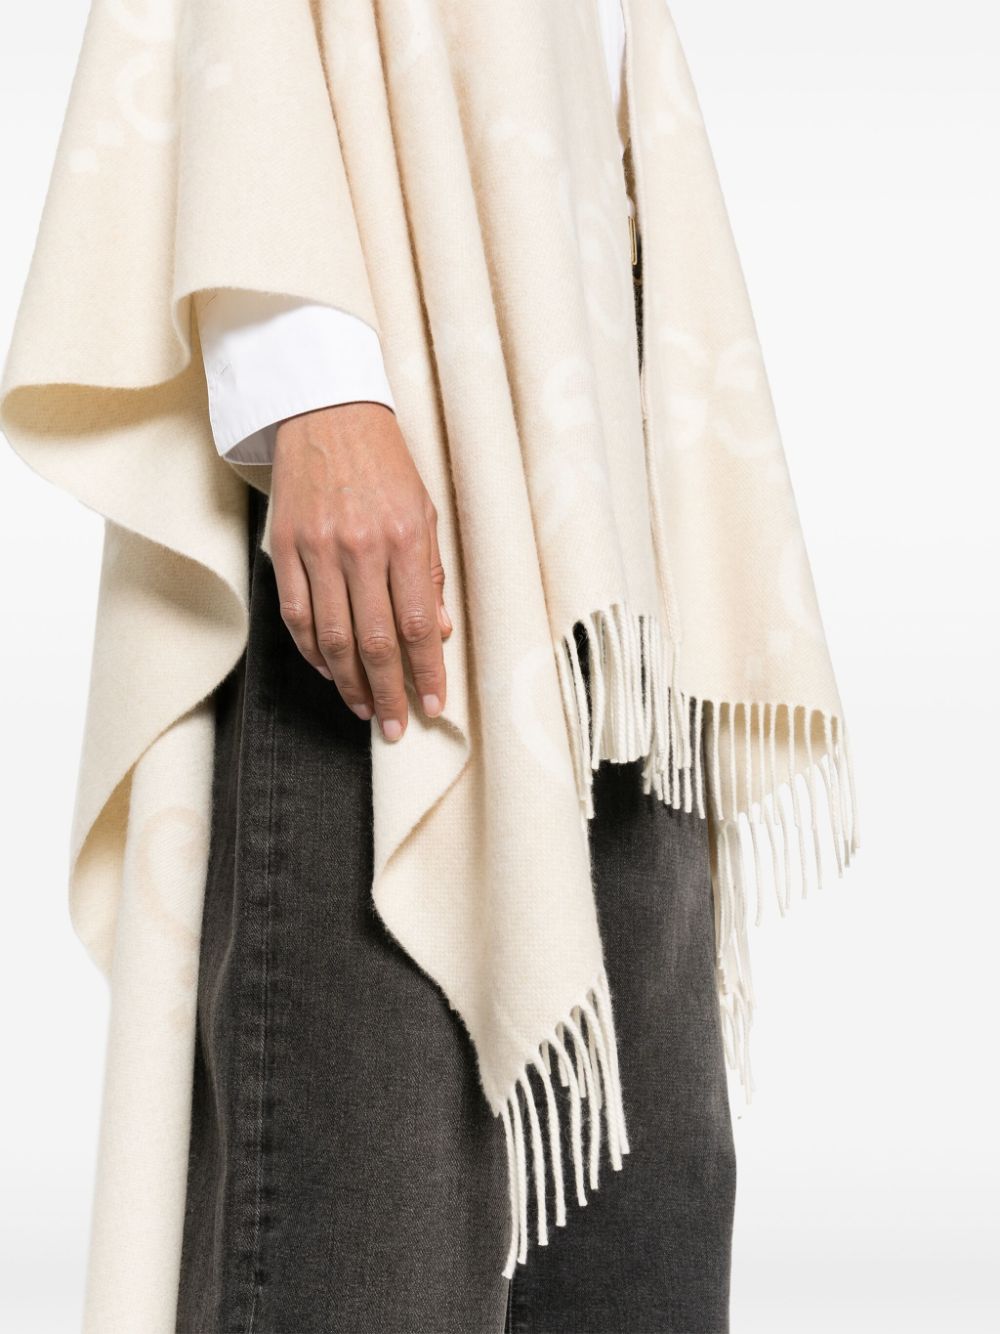 Shop Gucci Reversible Cashmere Knit Poncho In Camel Brown And Cream White In Beige